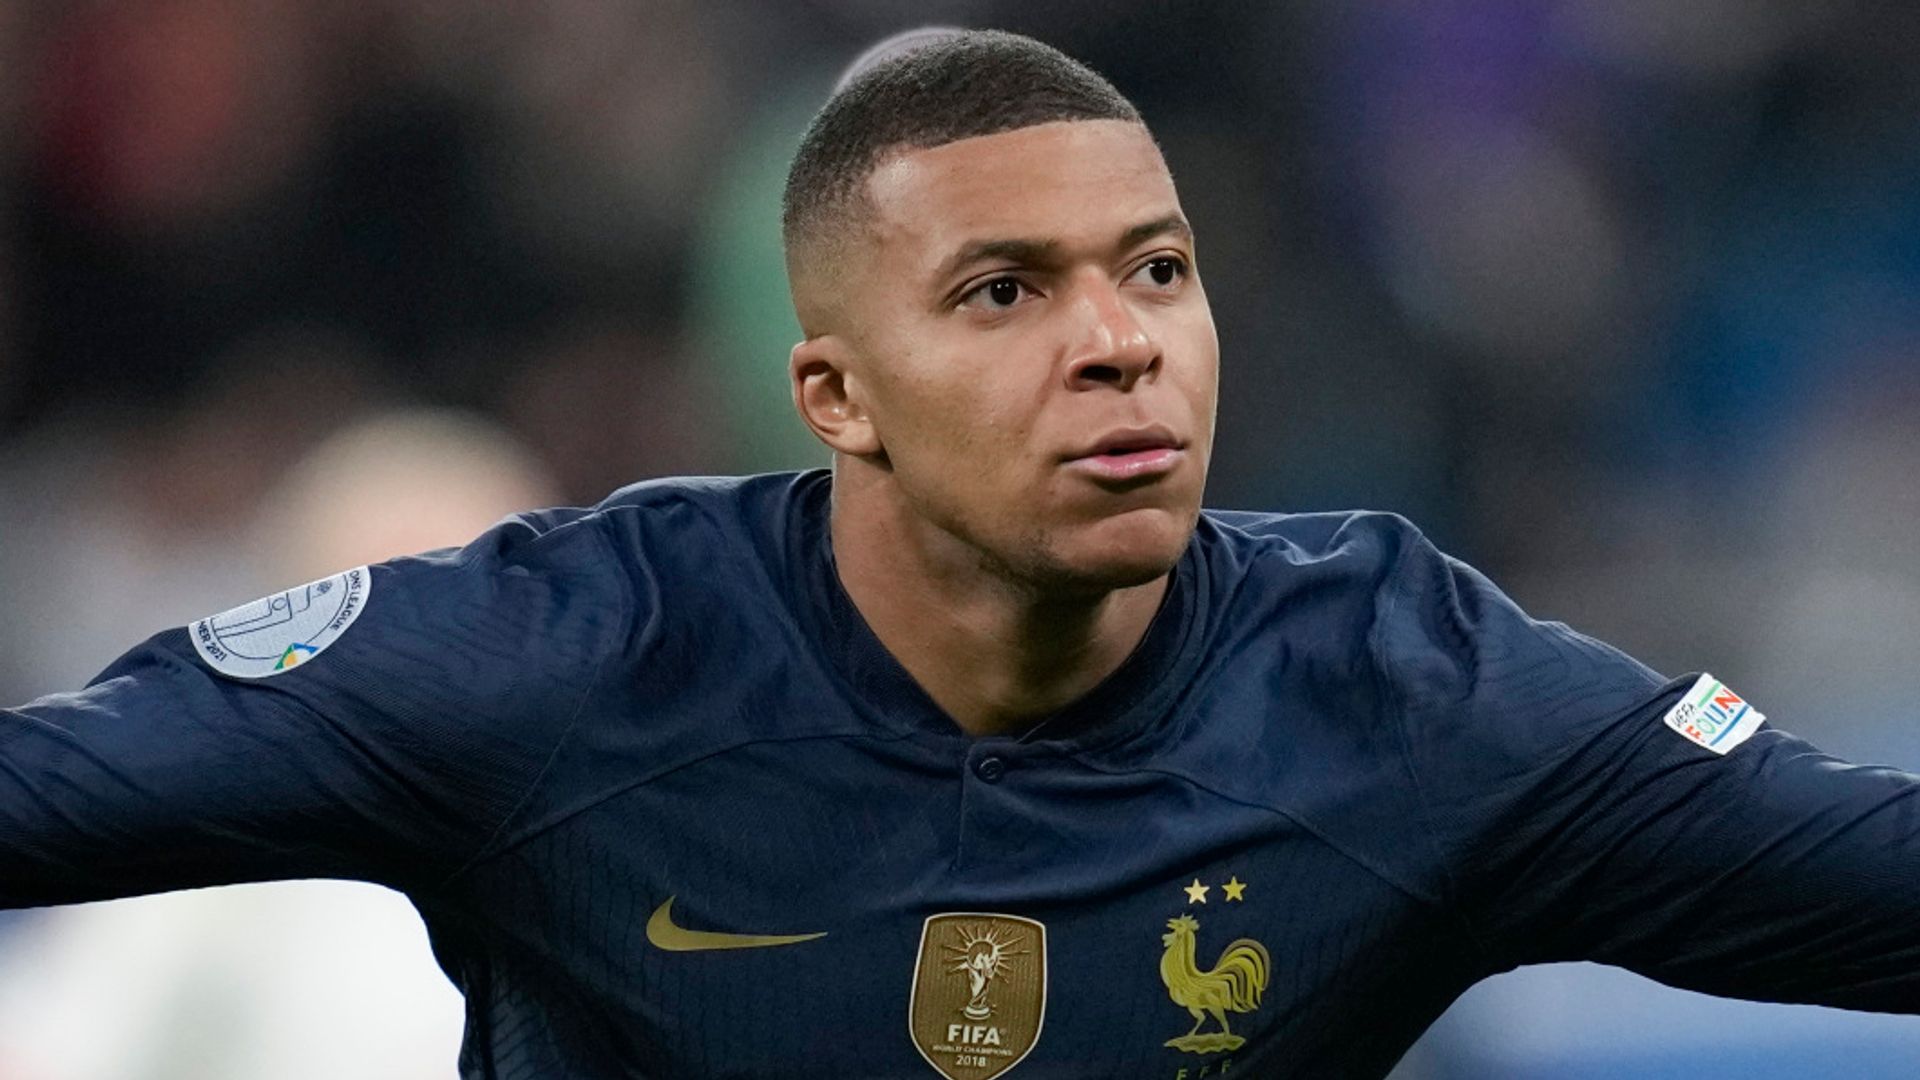 Nations League: Mbappe, Giroud score in France win | Netherlands close to finals